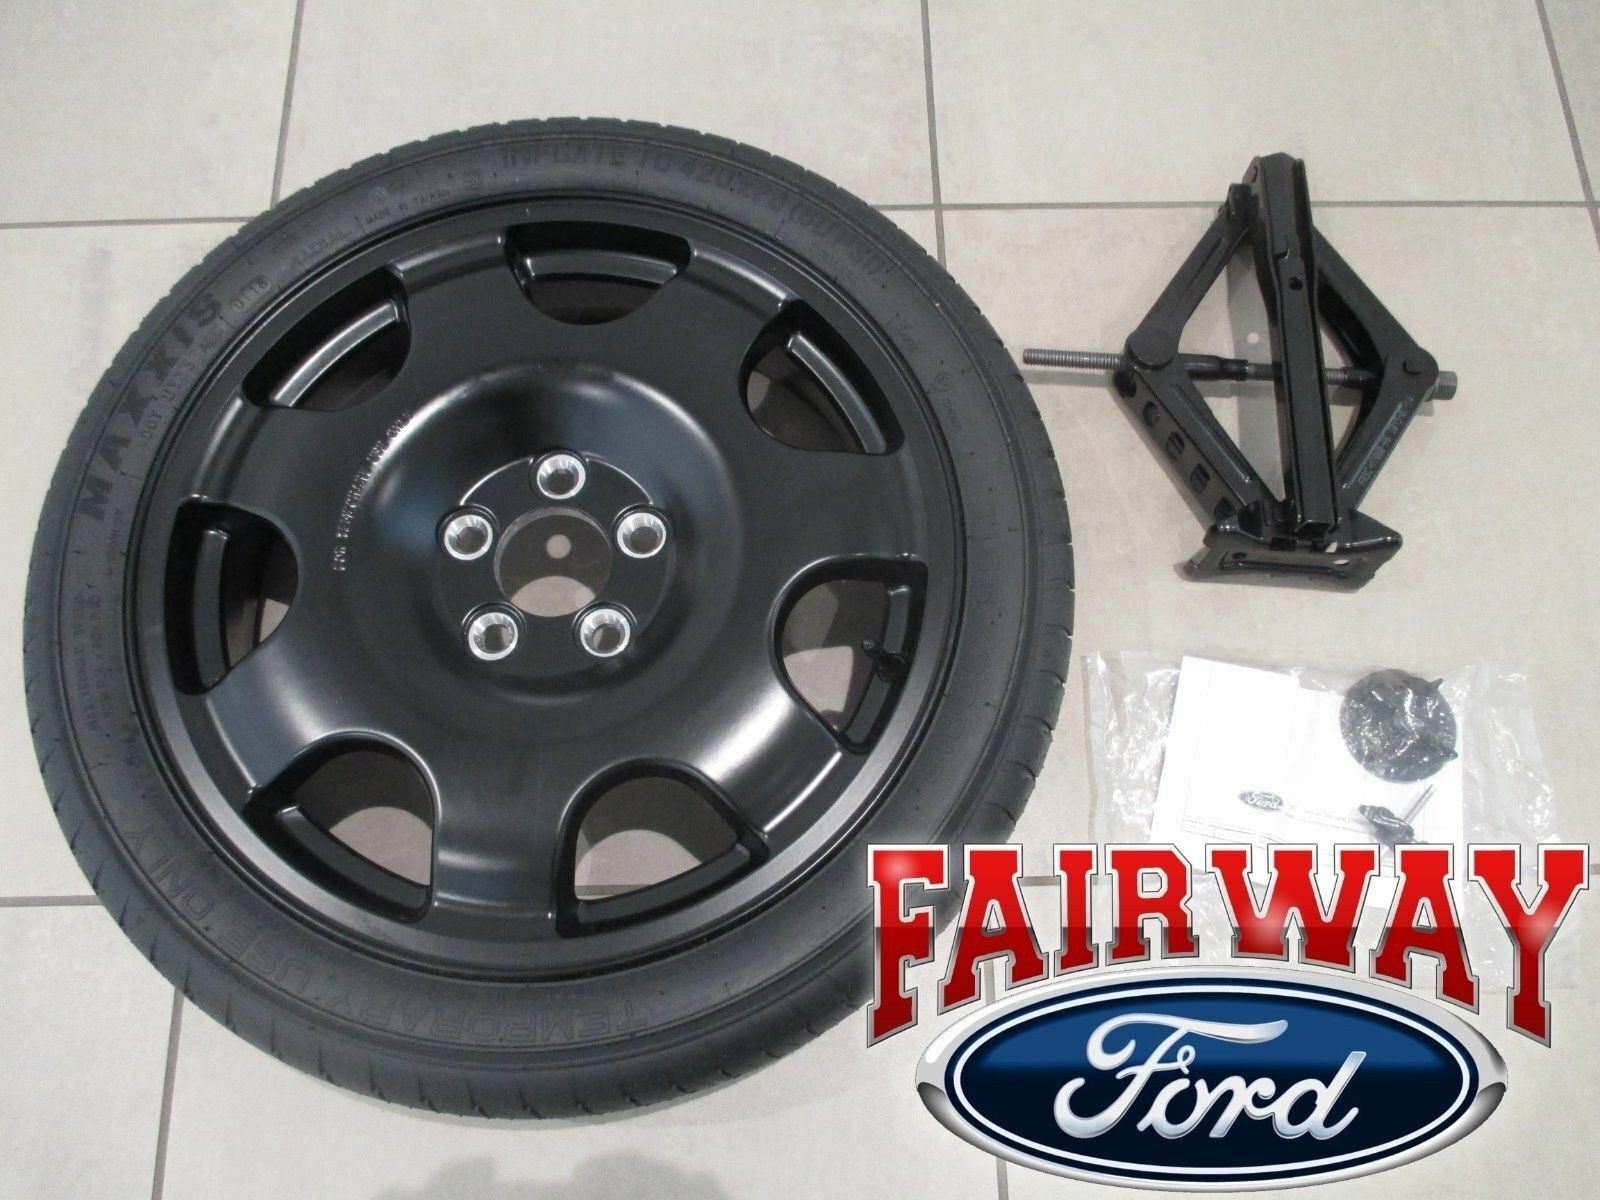 15 thru 23 Mustang OEM Genuine Ford Spare Wheel Tire Kit with Jack & Wrench NEW